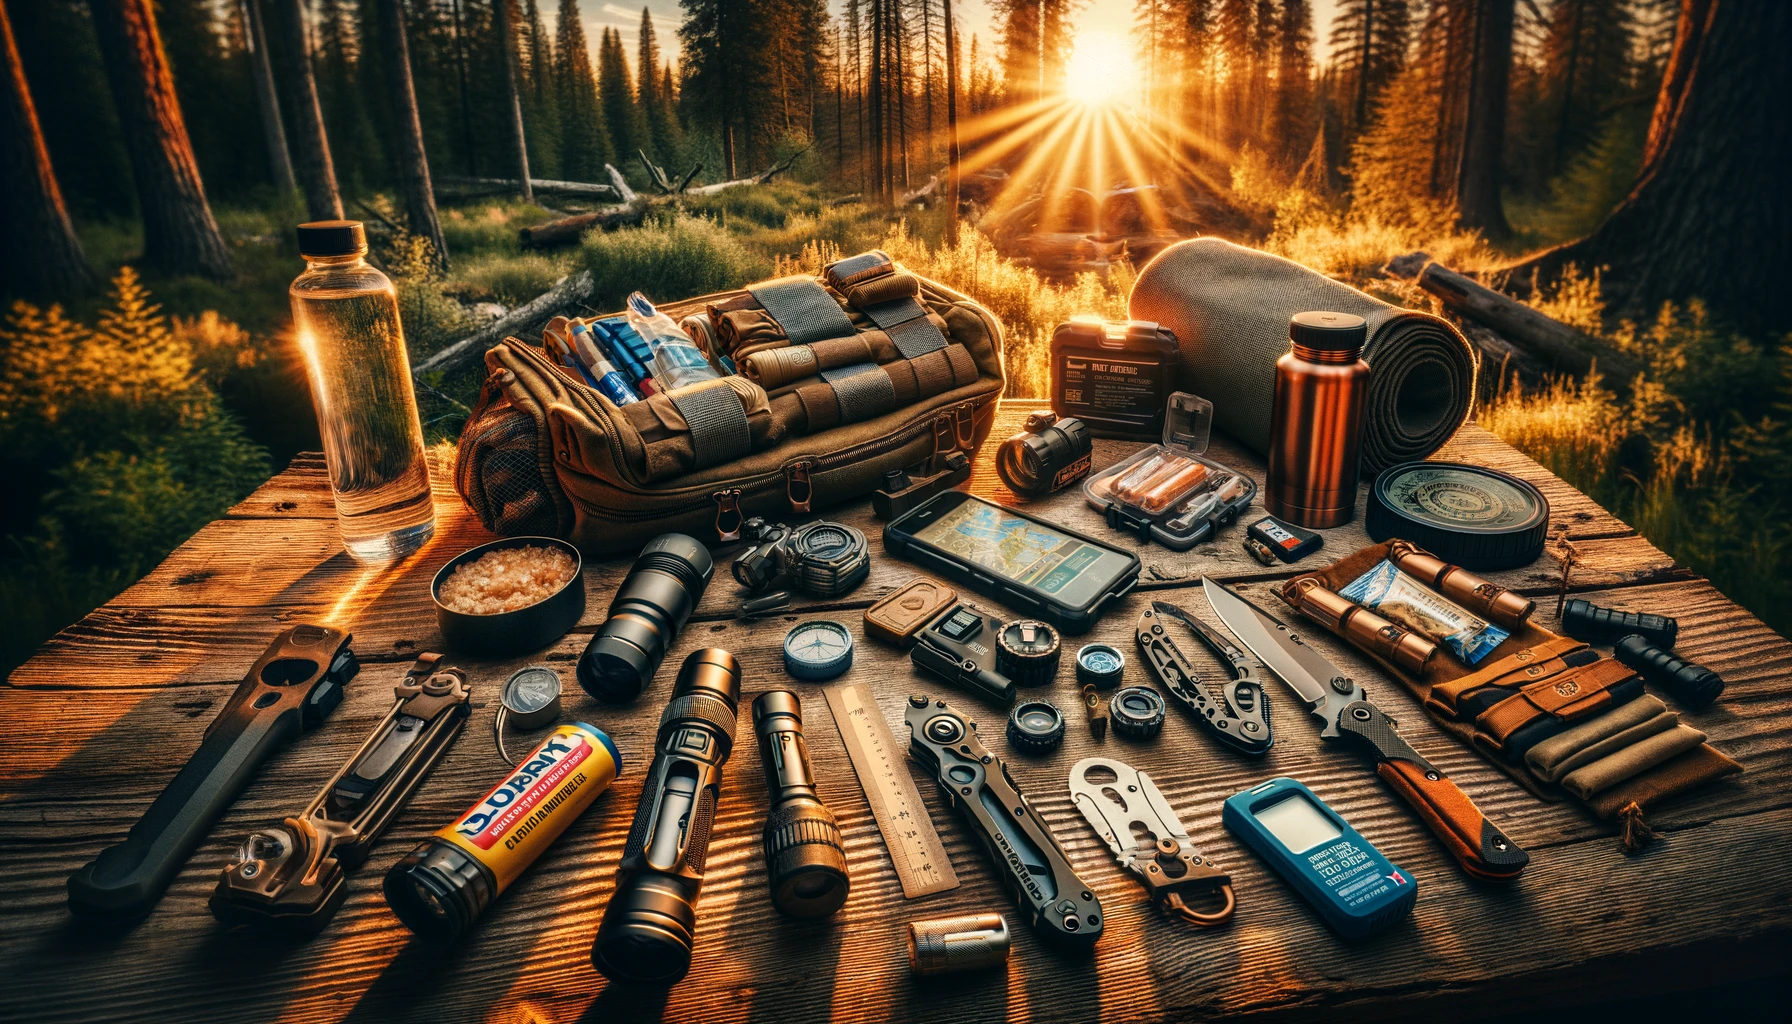 Essential survival gear for a prepper's Get Home Bag, including a water purifier, first aid kit, folding knife, flashlight, energy bars, cooking pot, fire starter, compass, and map, meticulously arranged on a rustic wooden table in the wilderness at golden hour, highlighting the importance of preparedness with a warm, inviting glow